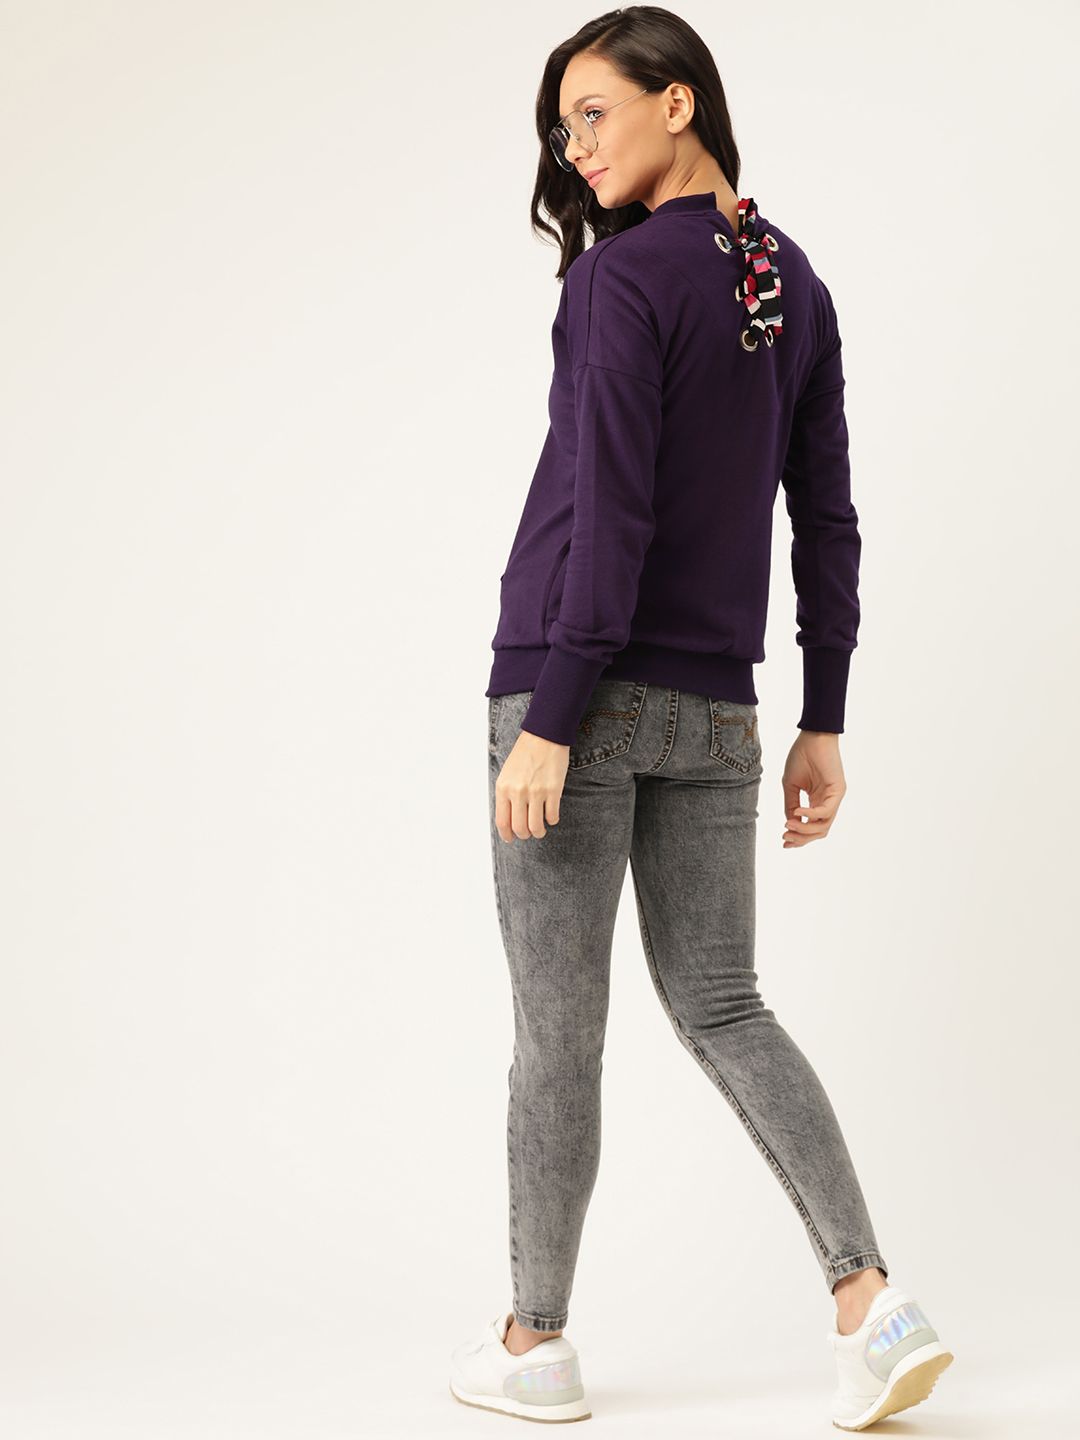 Belle Fille Women Aubergine Lace-Up Solid Sweatshirt Price in India